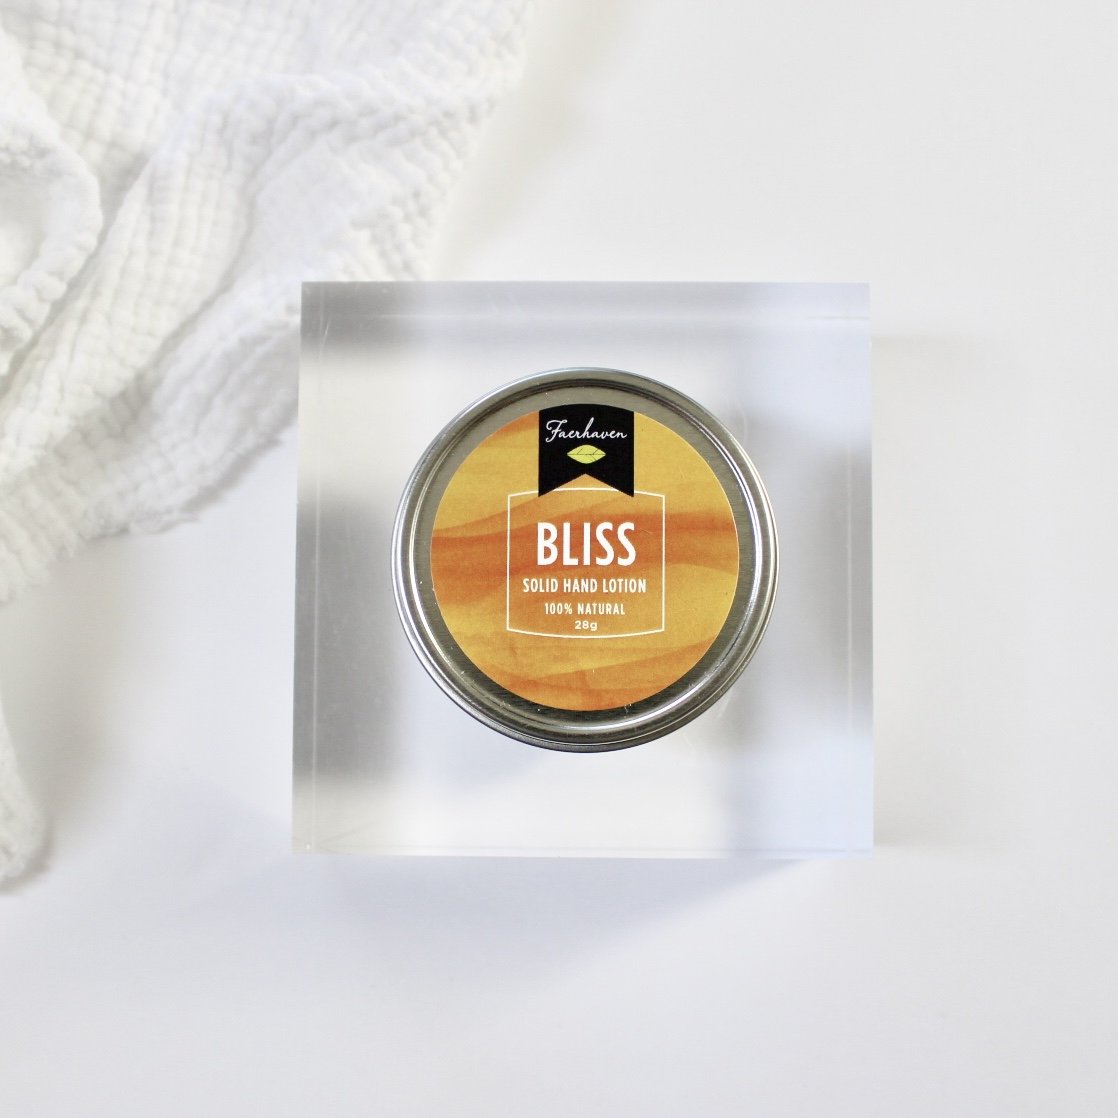 Bliss Solid Hand Lotion